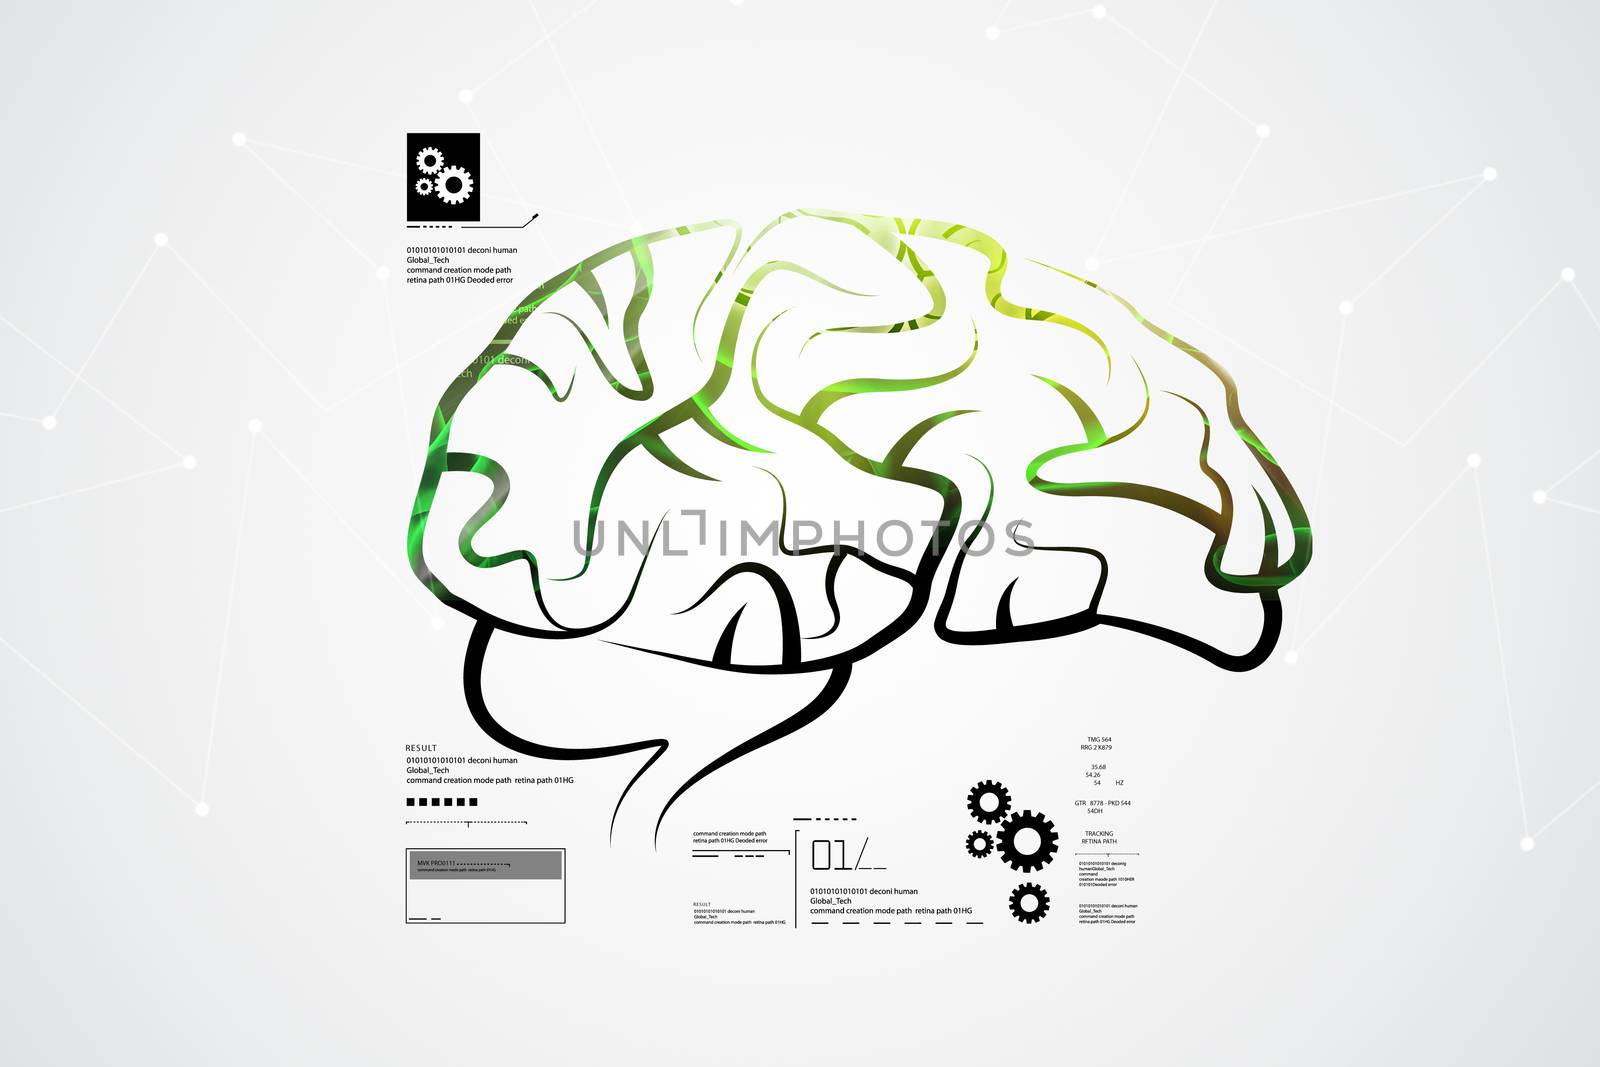 Human brain structure by cuteimage